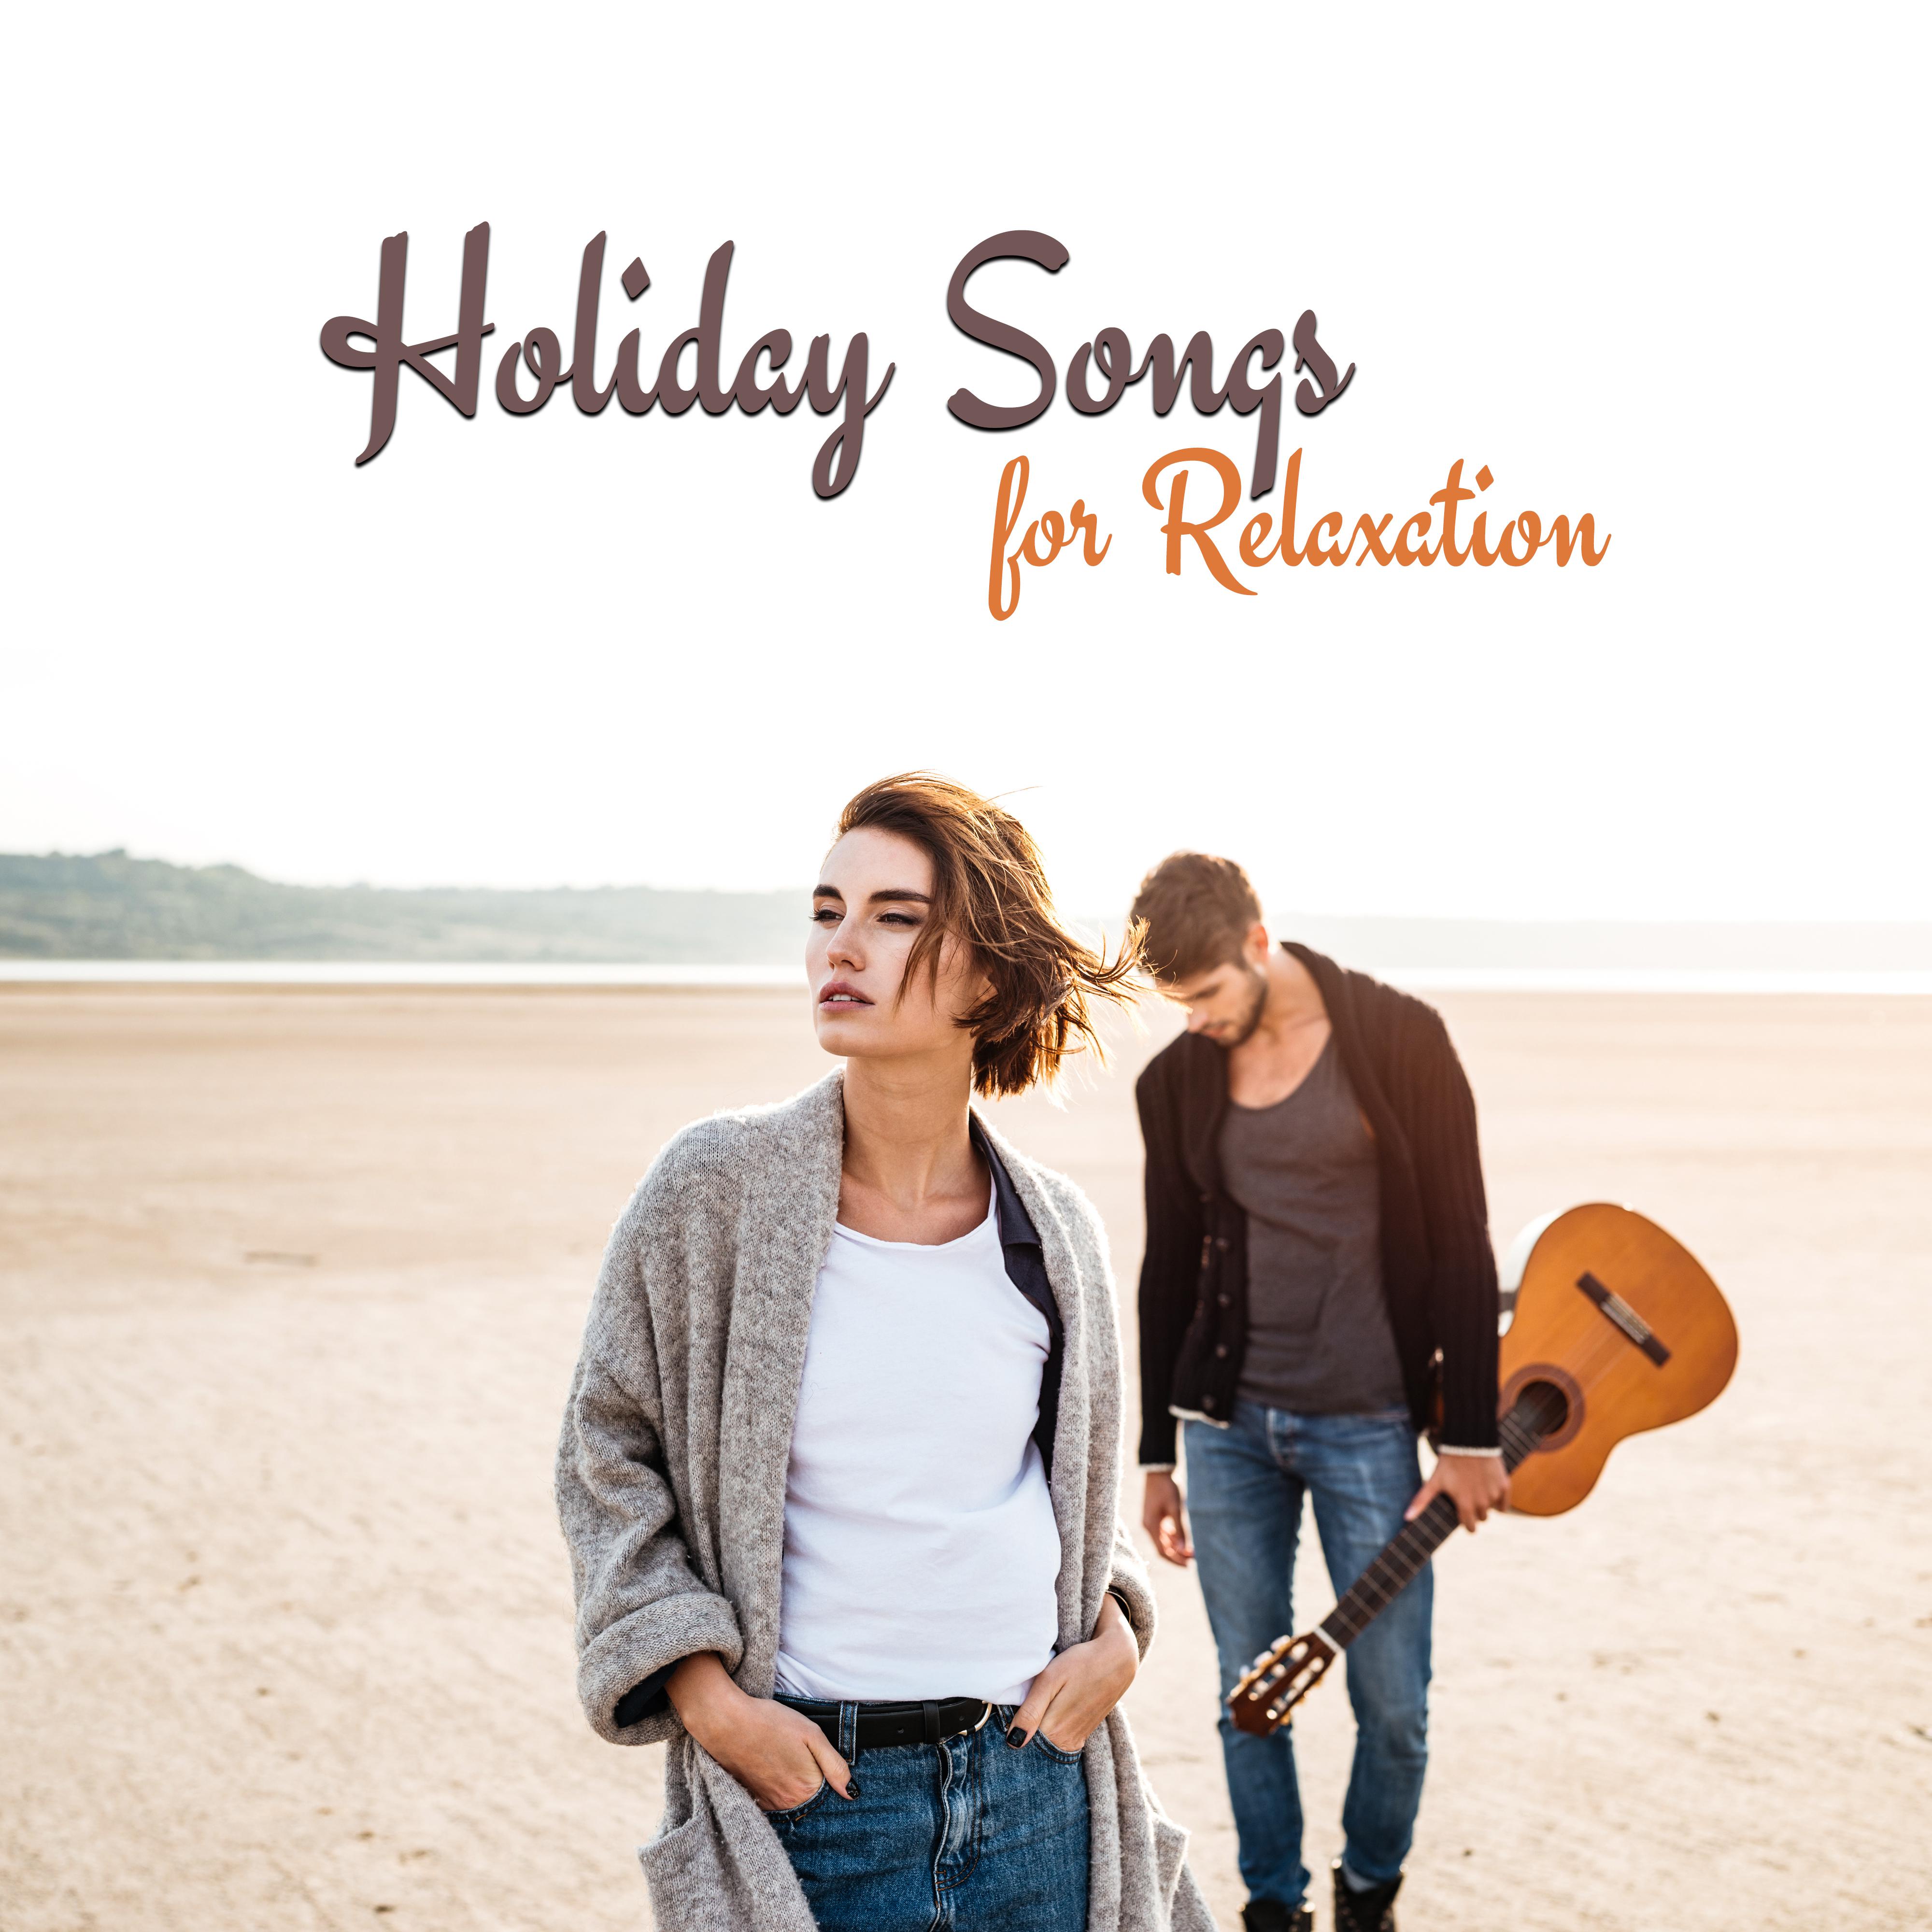 Holiday Songs for Relaxation  Sunny Beach, Chill Paradise, Soft Vibes, Chill House, Ibiza Lounge, Ambient Summer, Rest